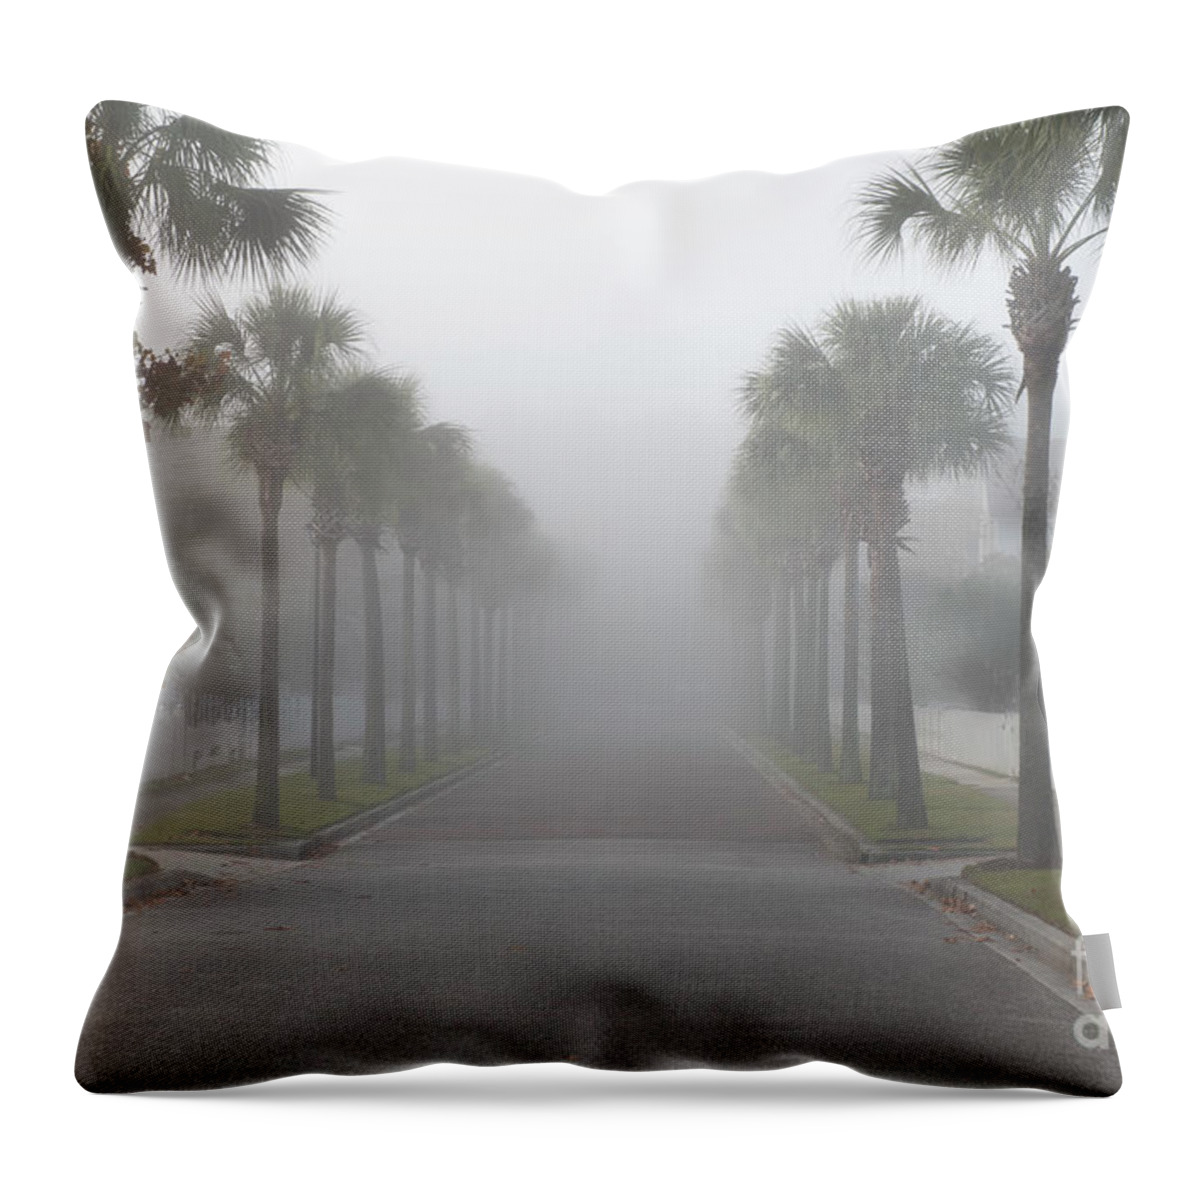 Fog Throw Pillow featuring the photograph Foggy Row of Palms by Dale Powell